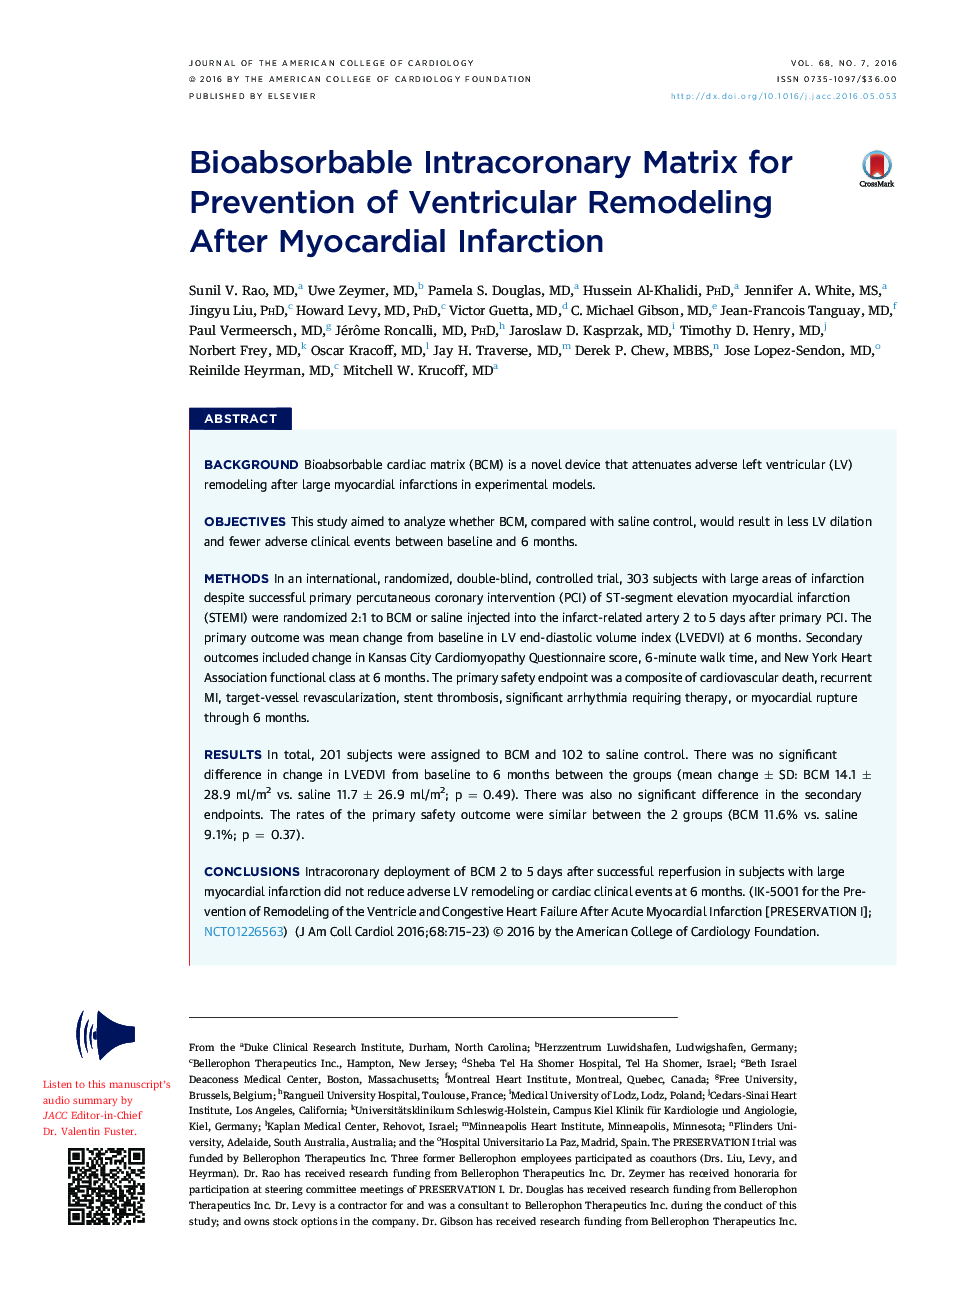 Bioabsorbable Intracoronary Matrix for Prevention of Ventricular Remodeling After Myocardial Infarction 